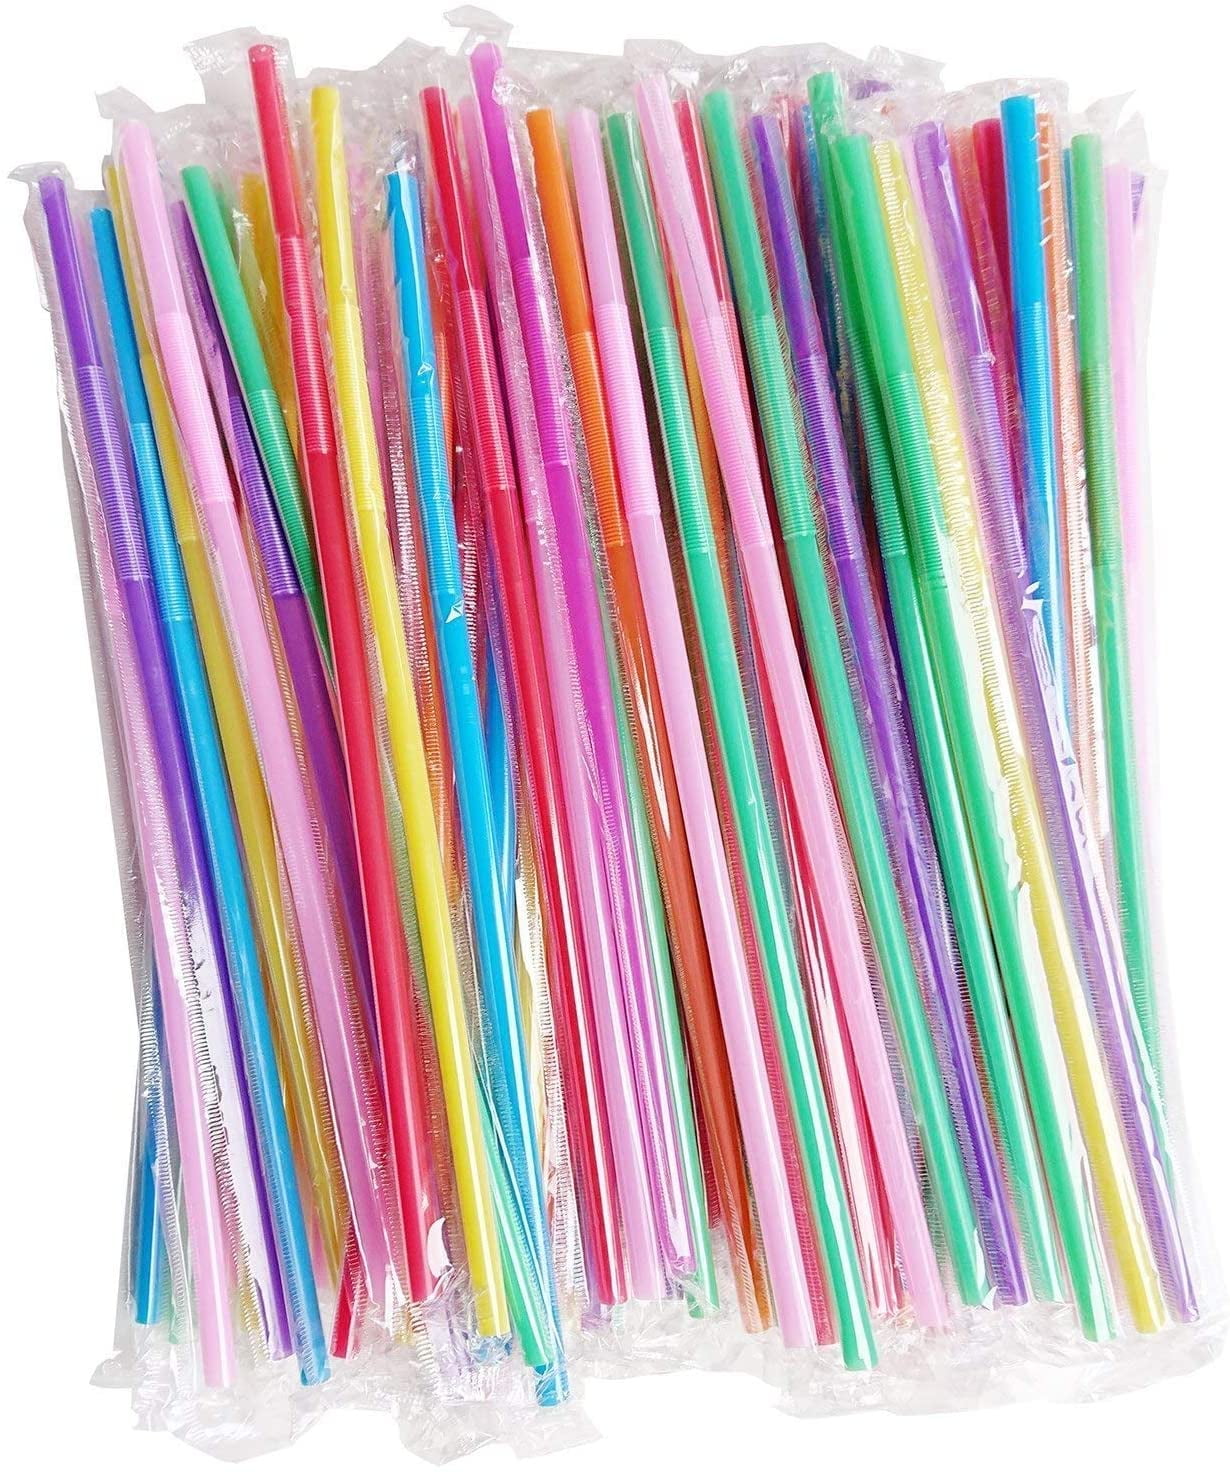 Details about   100 Flexible Drinking Straws show original title Straws in various GH Colorful Colors Q0L5 